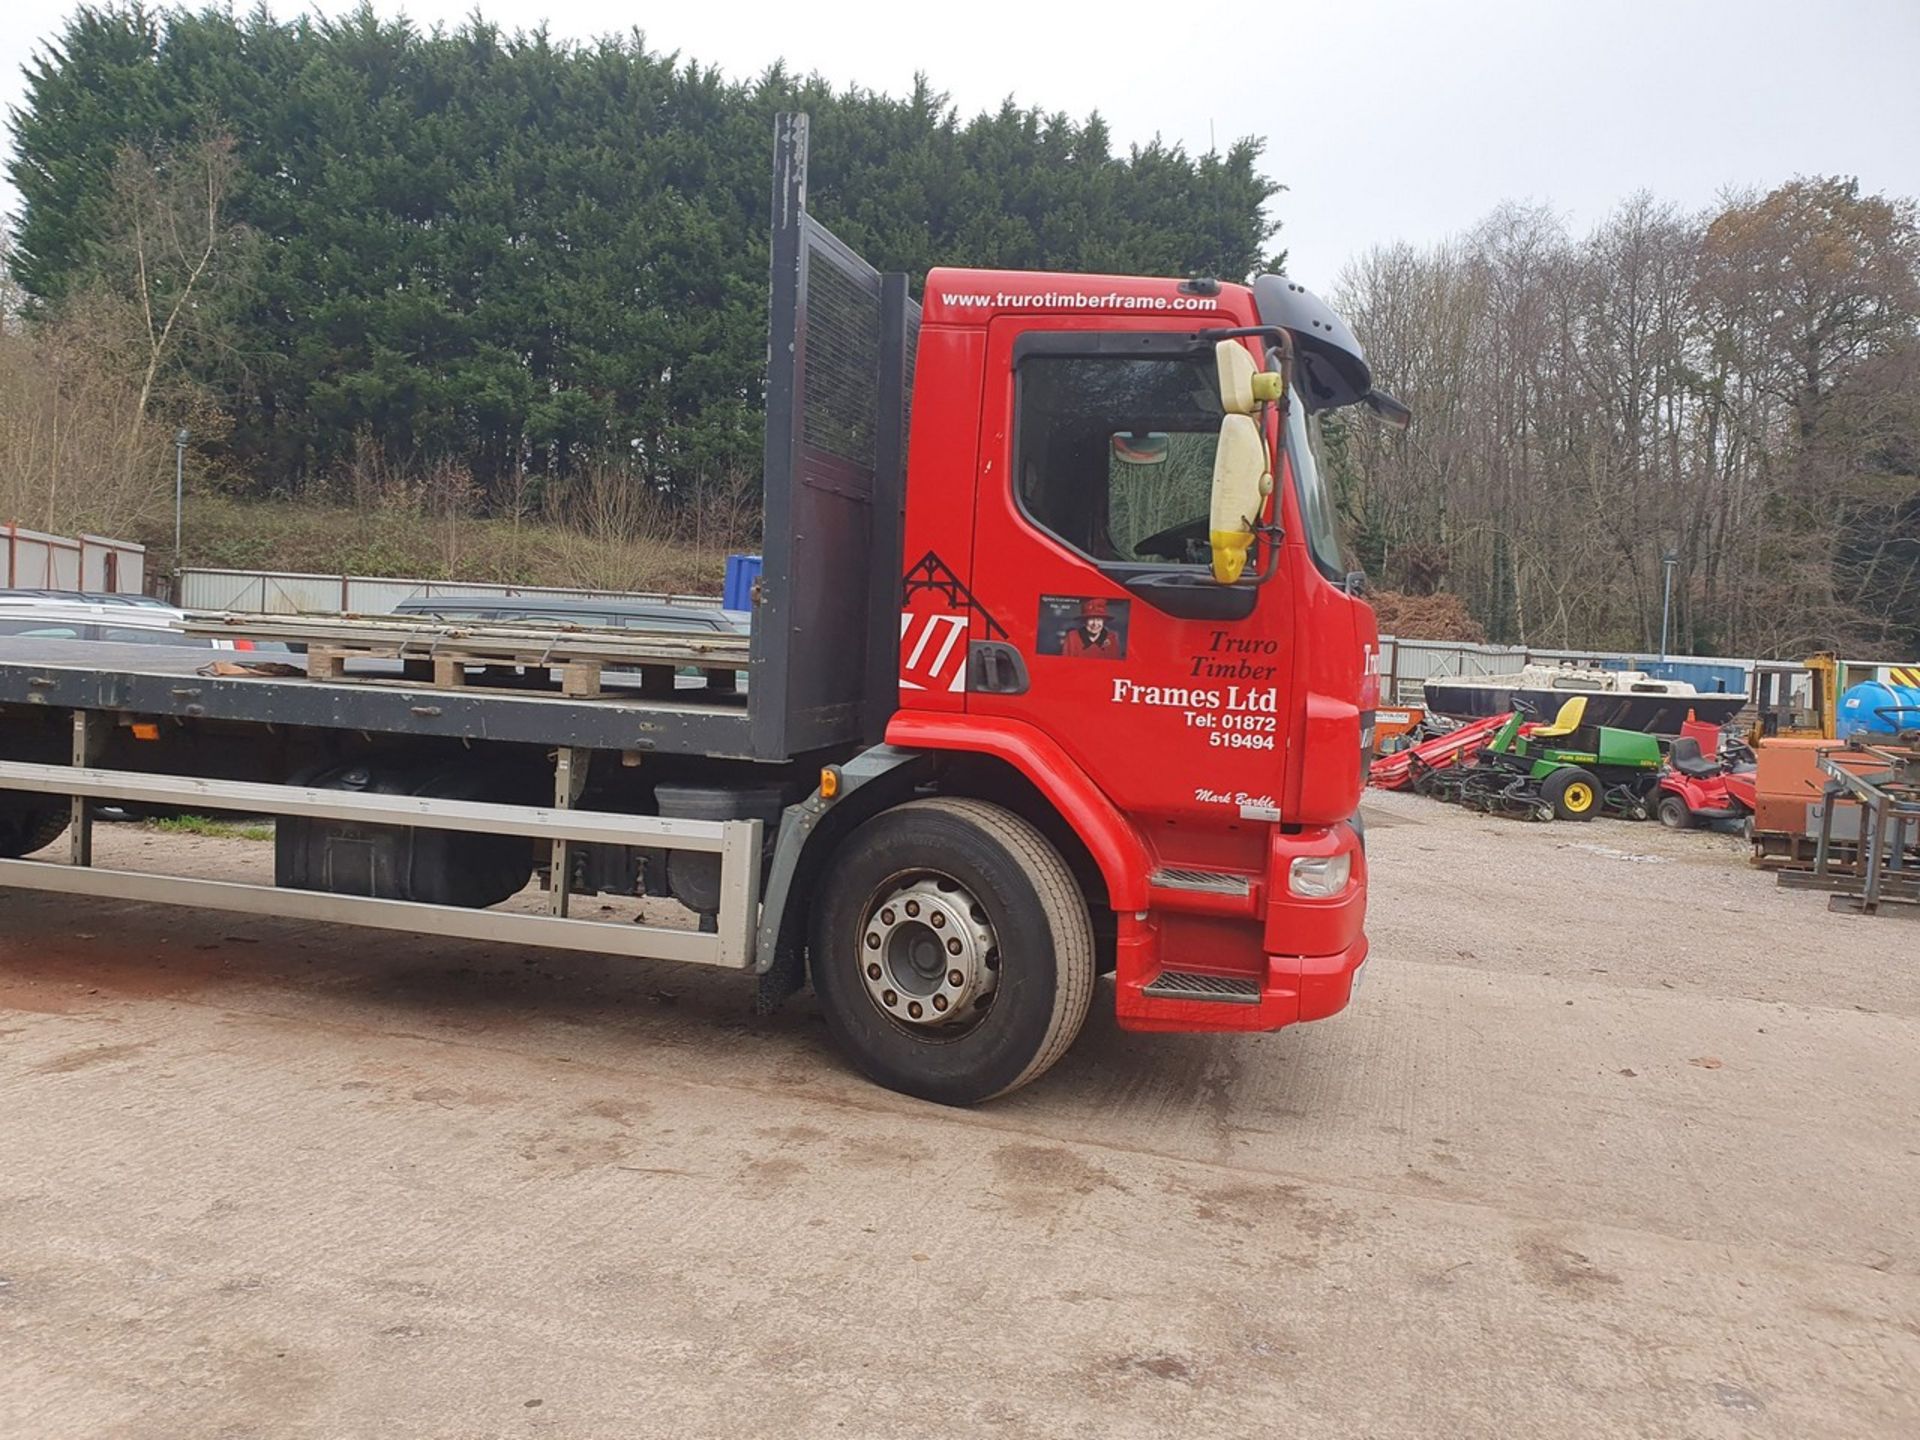 13/13 DAF TRUCKS FLAT BED - 6693cc 2dr (Red) - Image 3 of 23